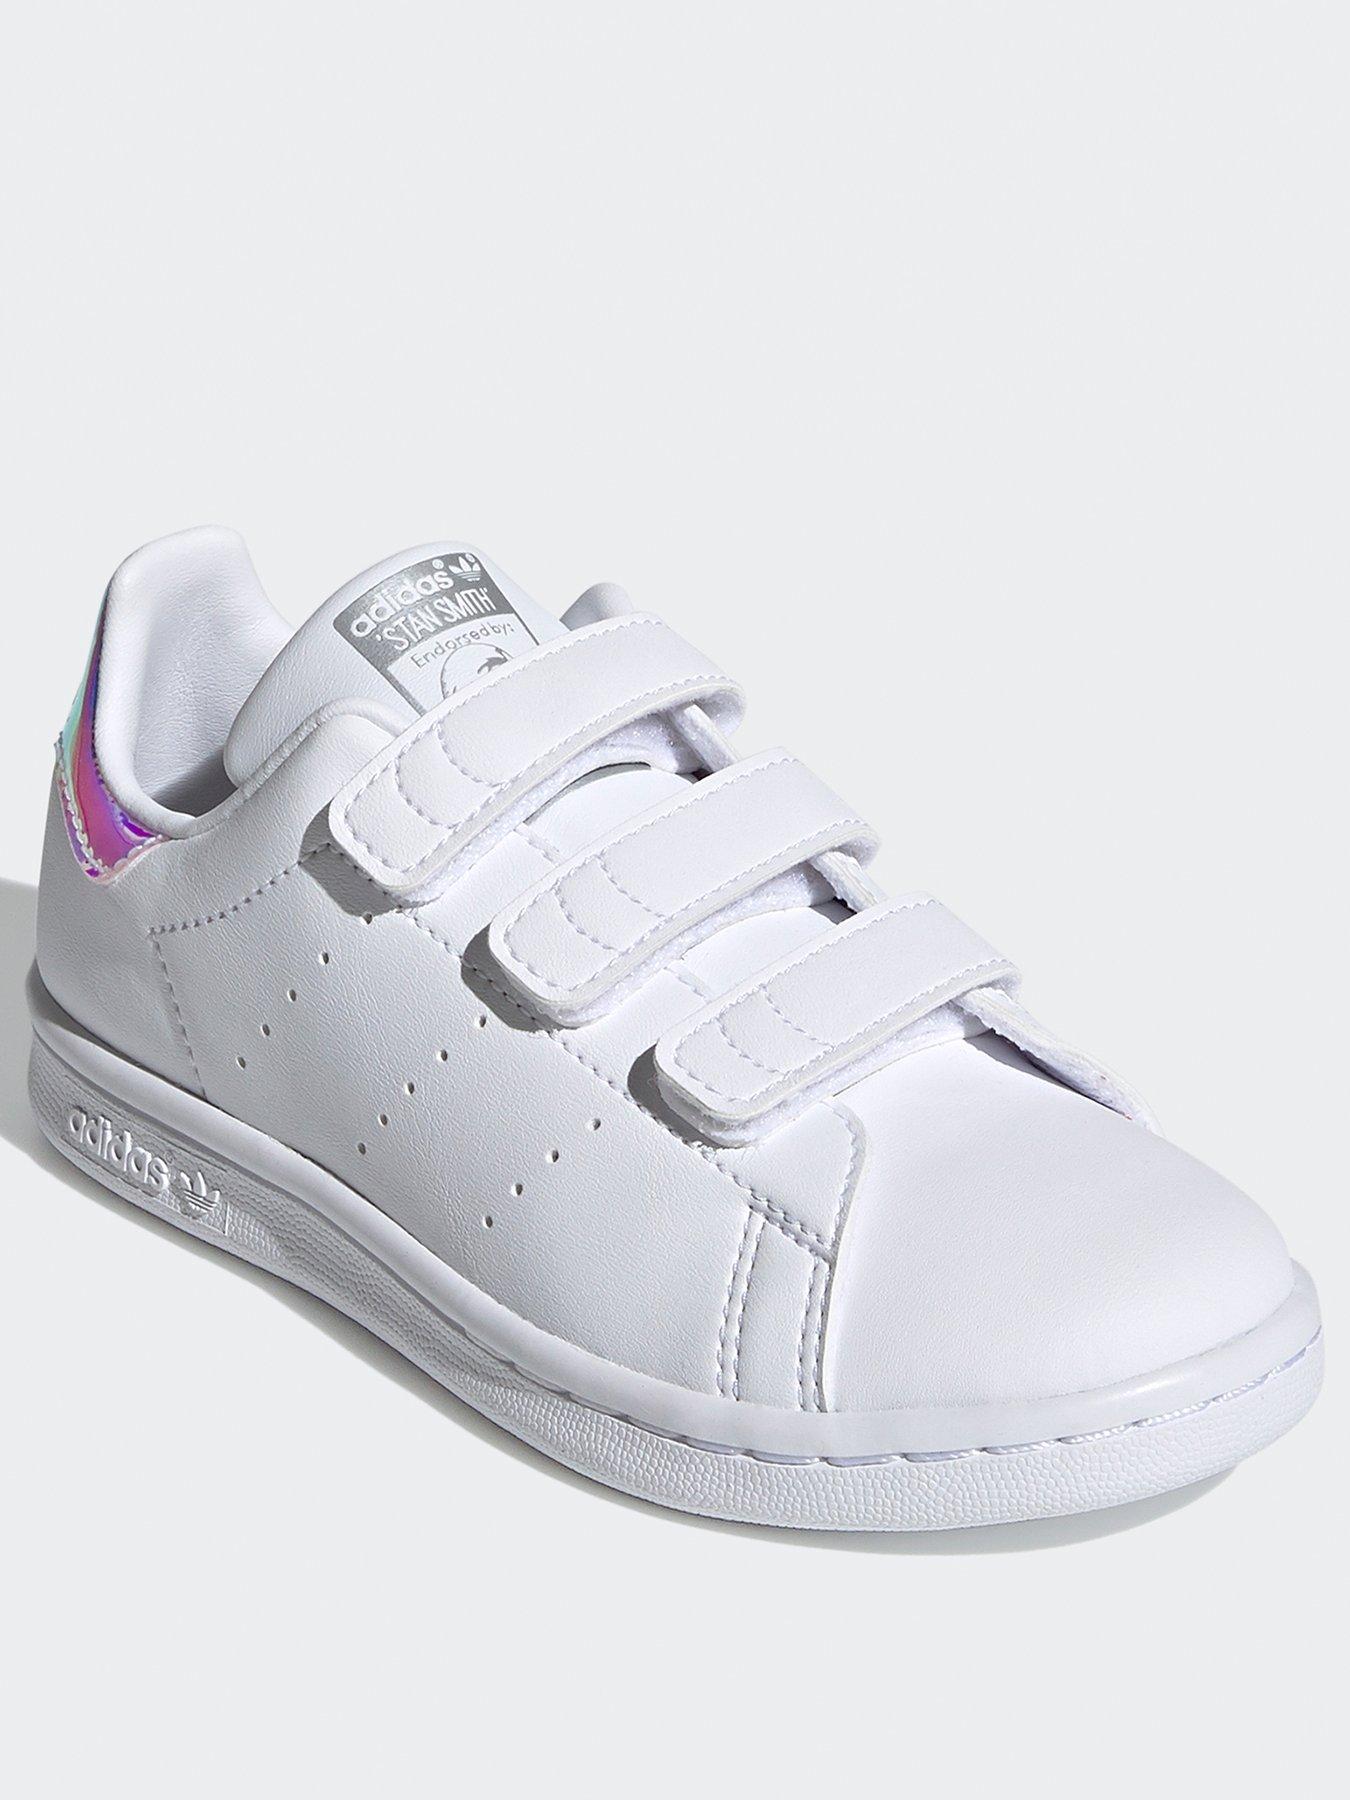  Stan Smith Shoes